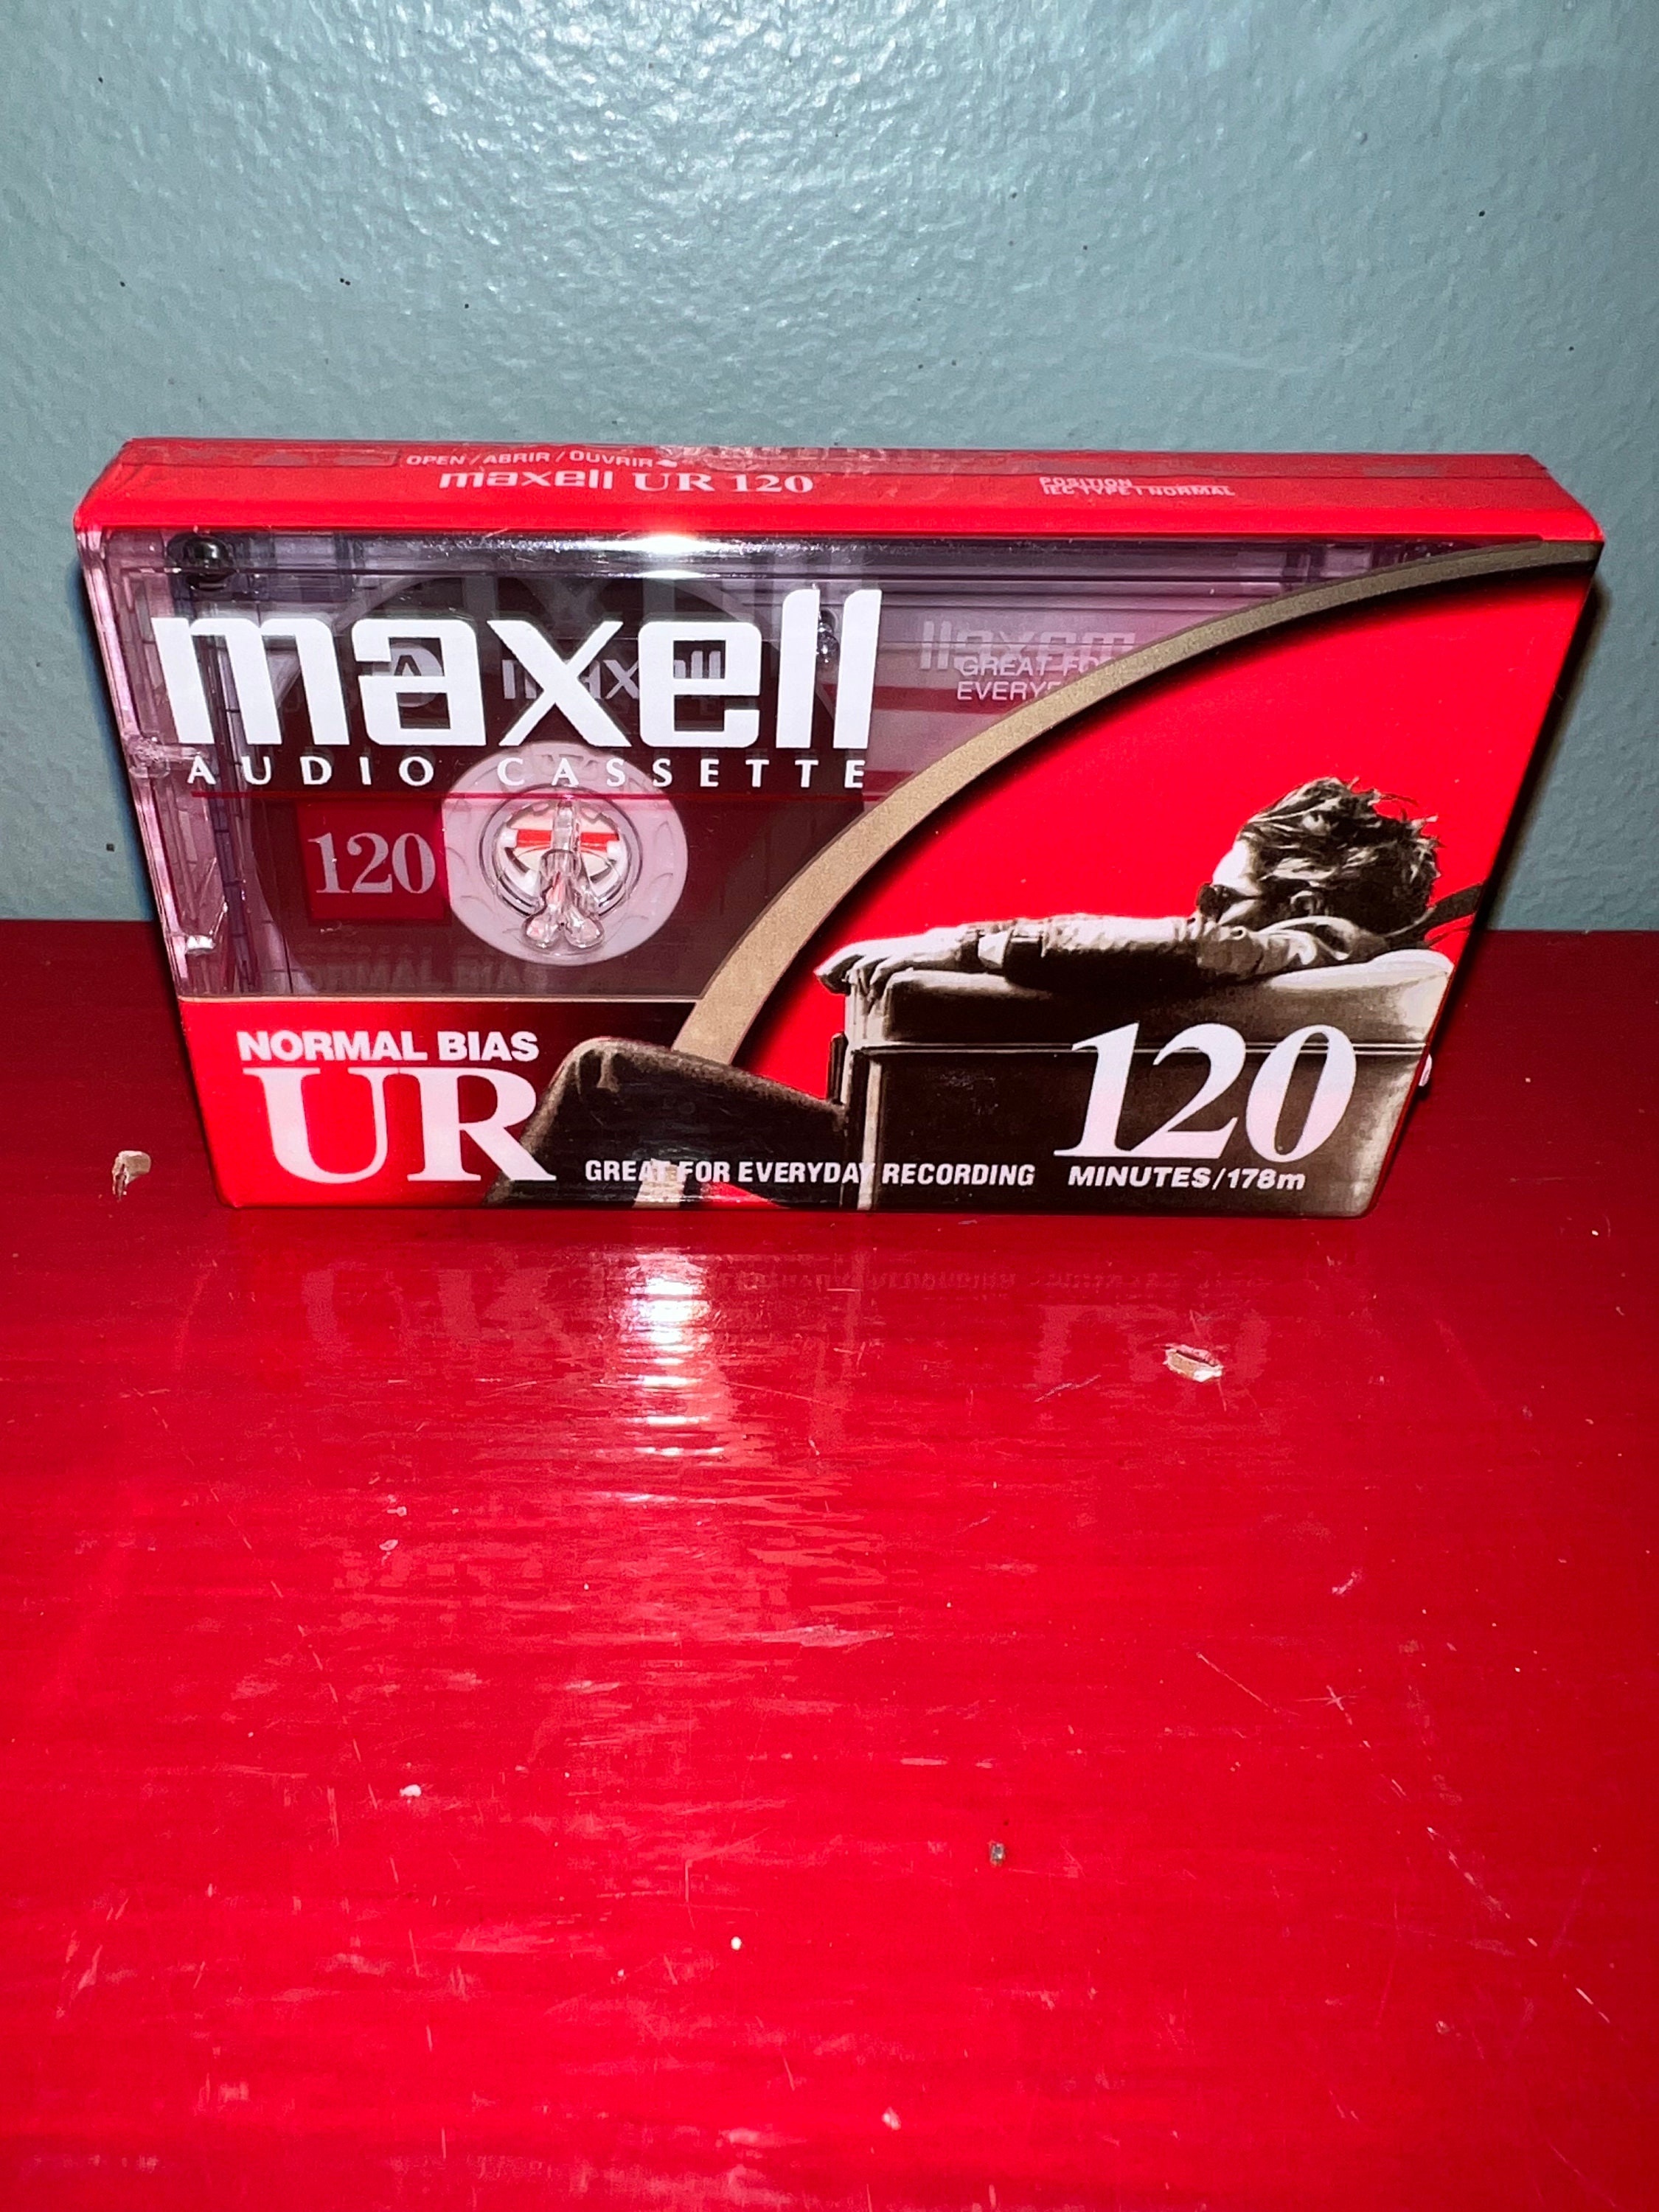 Maxell UR90 Cassette Tapes (5 Pack) - Blank Cassette Tapes for Music and  Voice Recording - Up to 90 Minutes of Recording Time in the Computers &  Peripherals department at